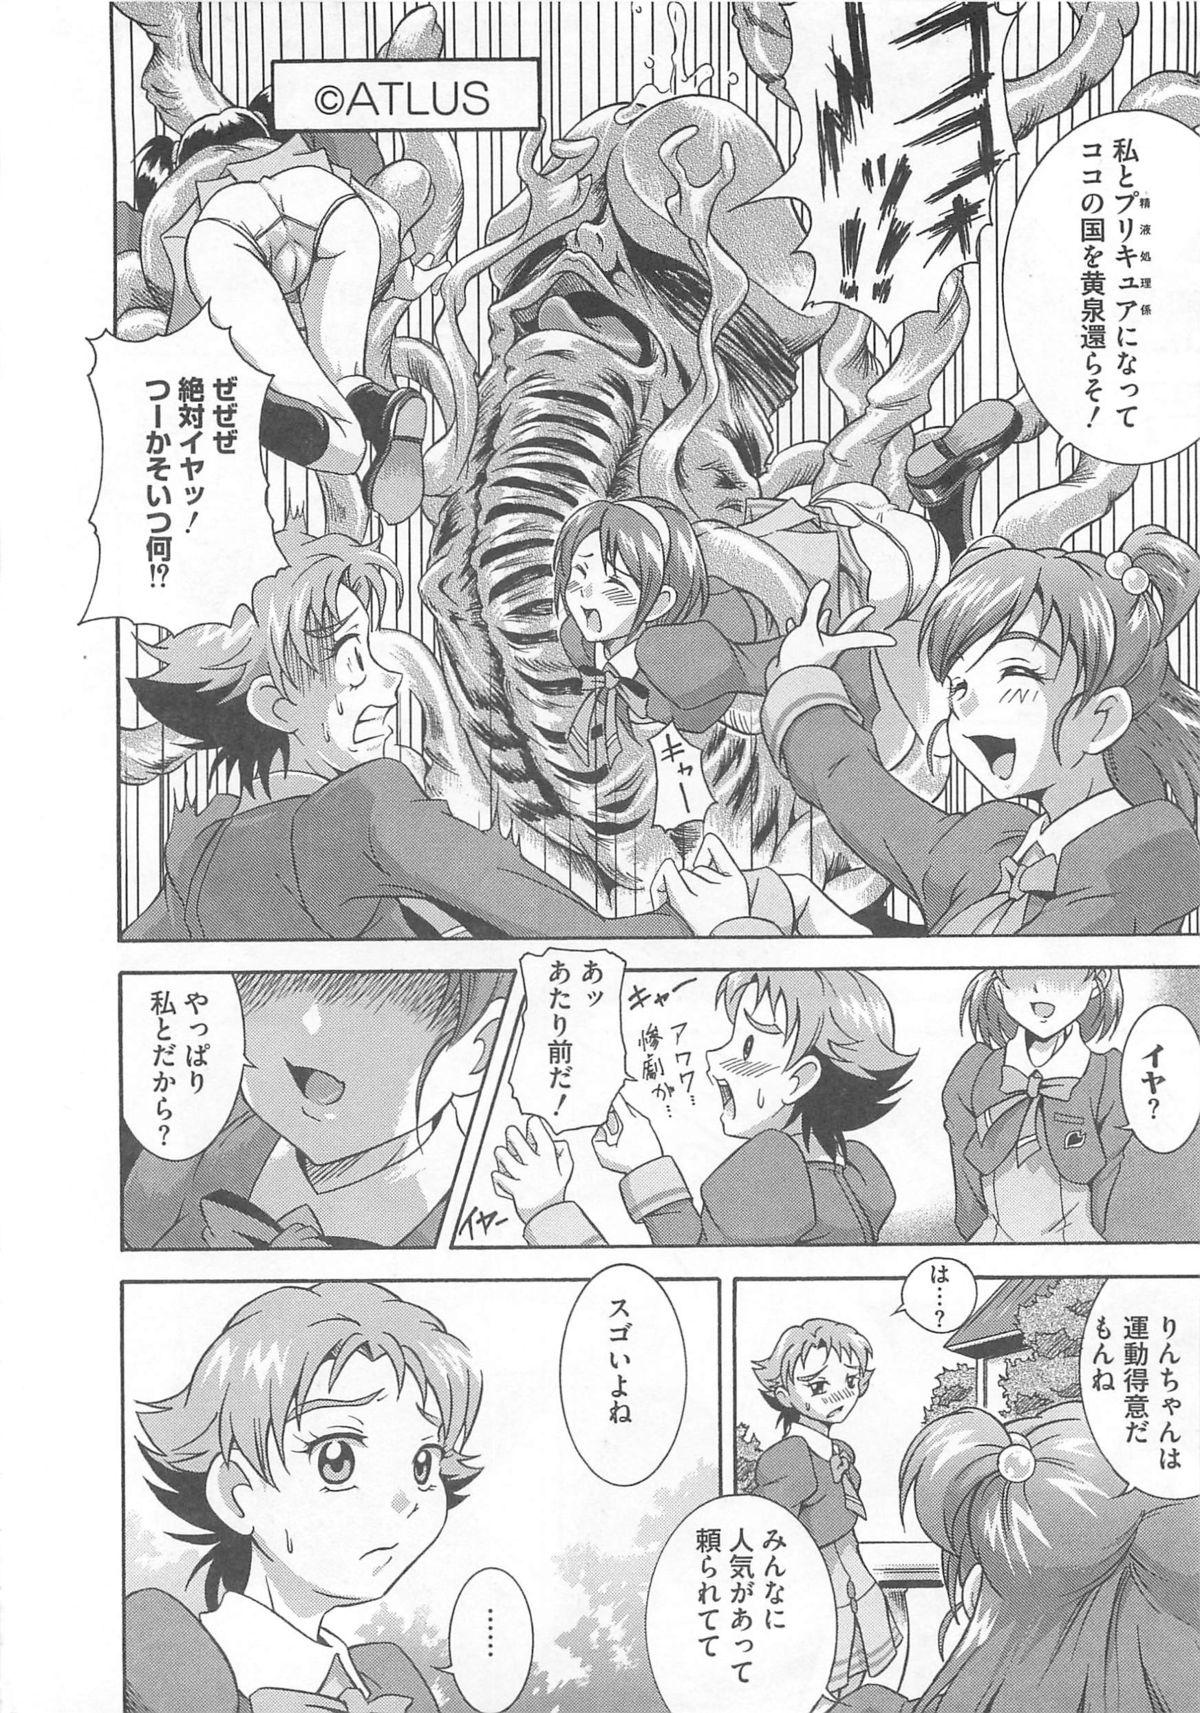 Beurette Yes! Erocure V - Pretty cure Yes precure 5 Ass - Page 7